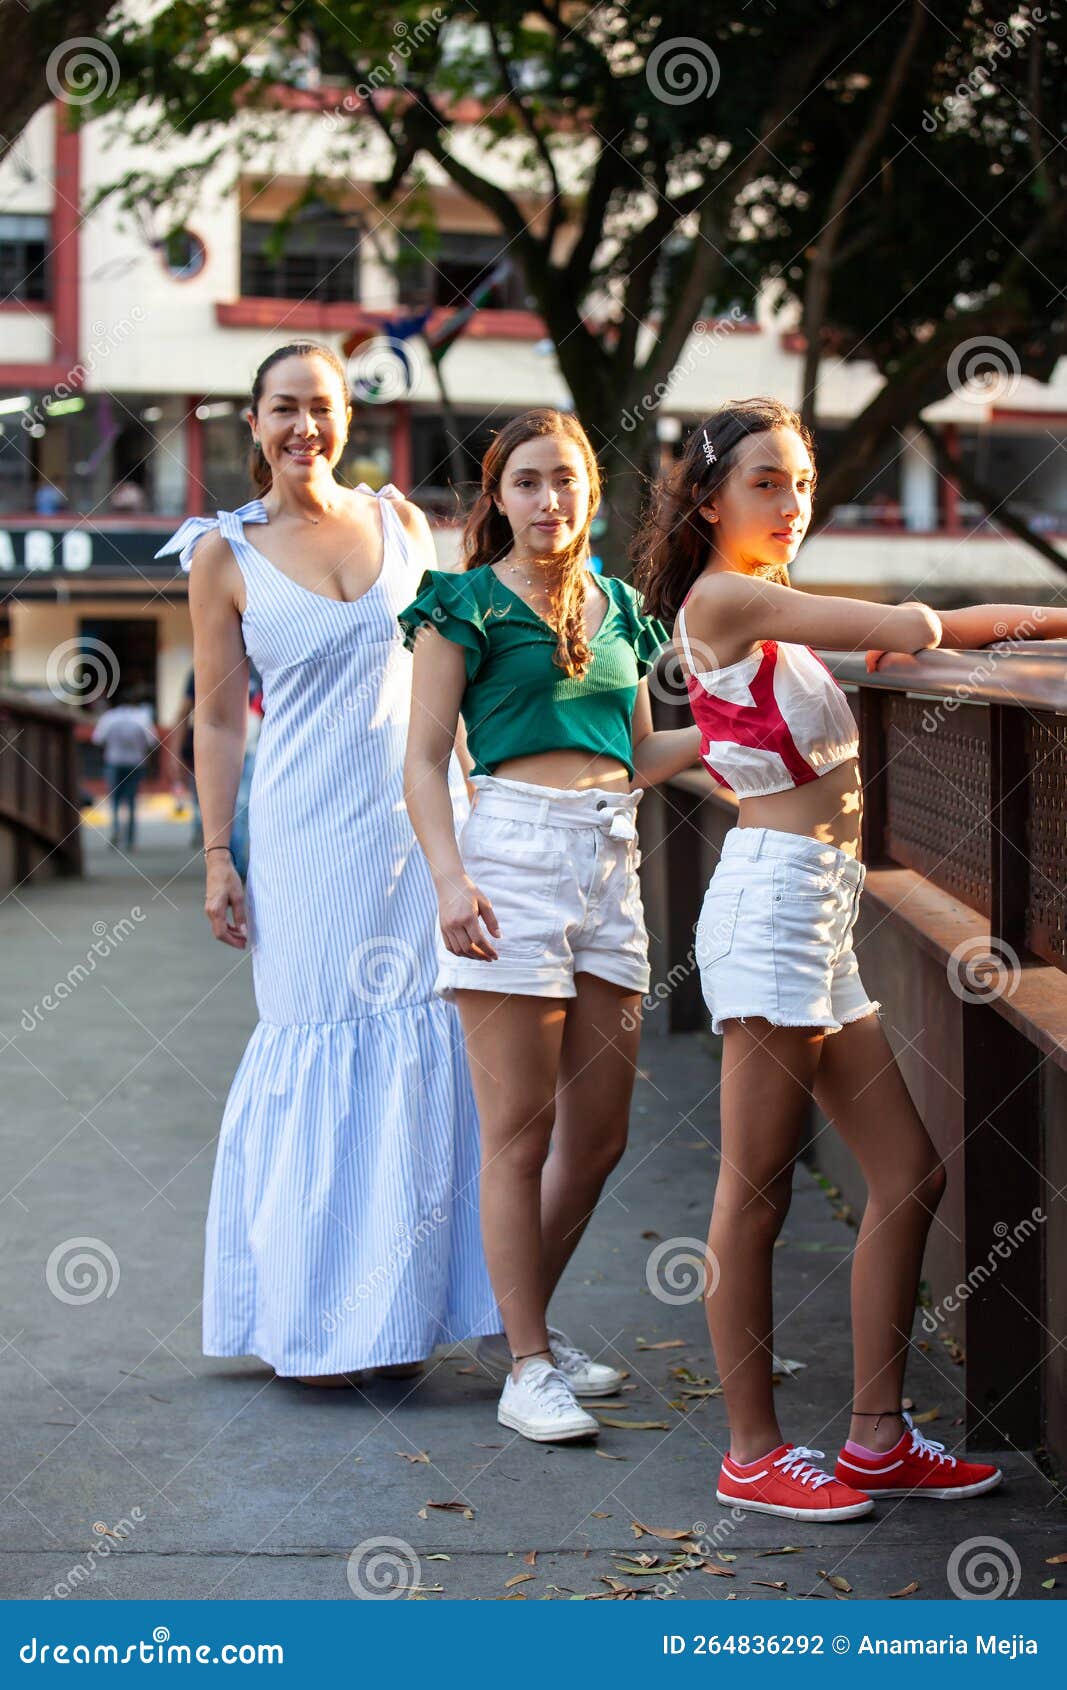 tourists at one of the bridges along the cali river boulevard in the city of cali in colombia. mother and teenager daughters